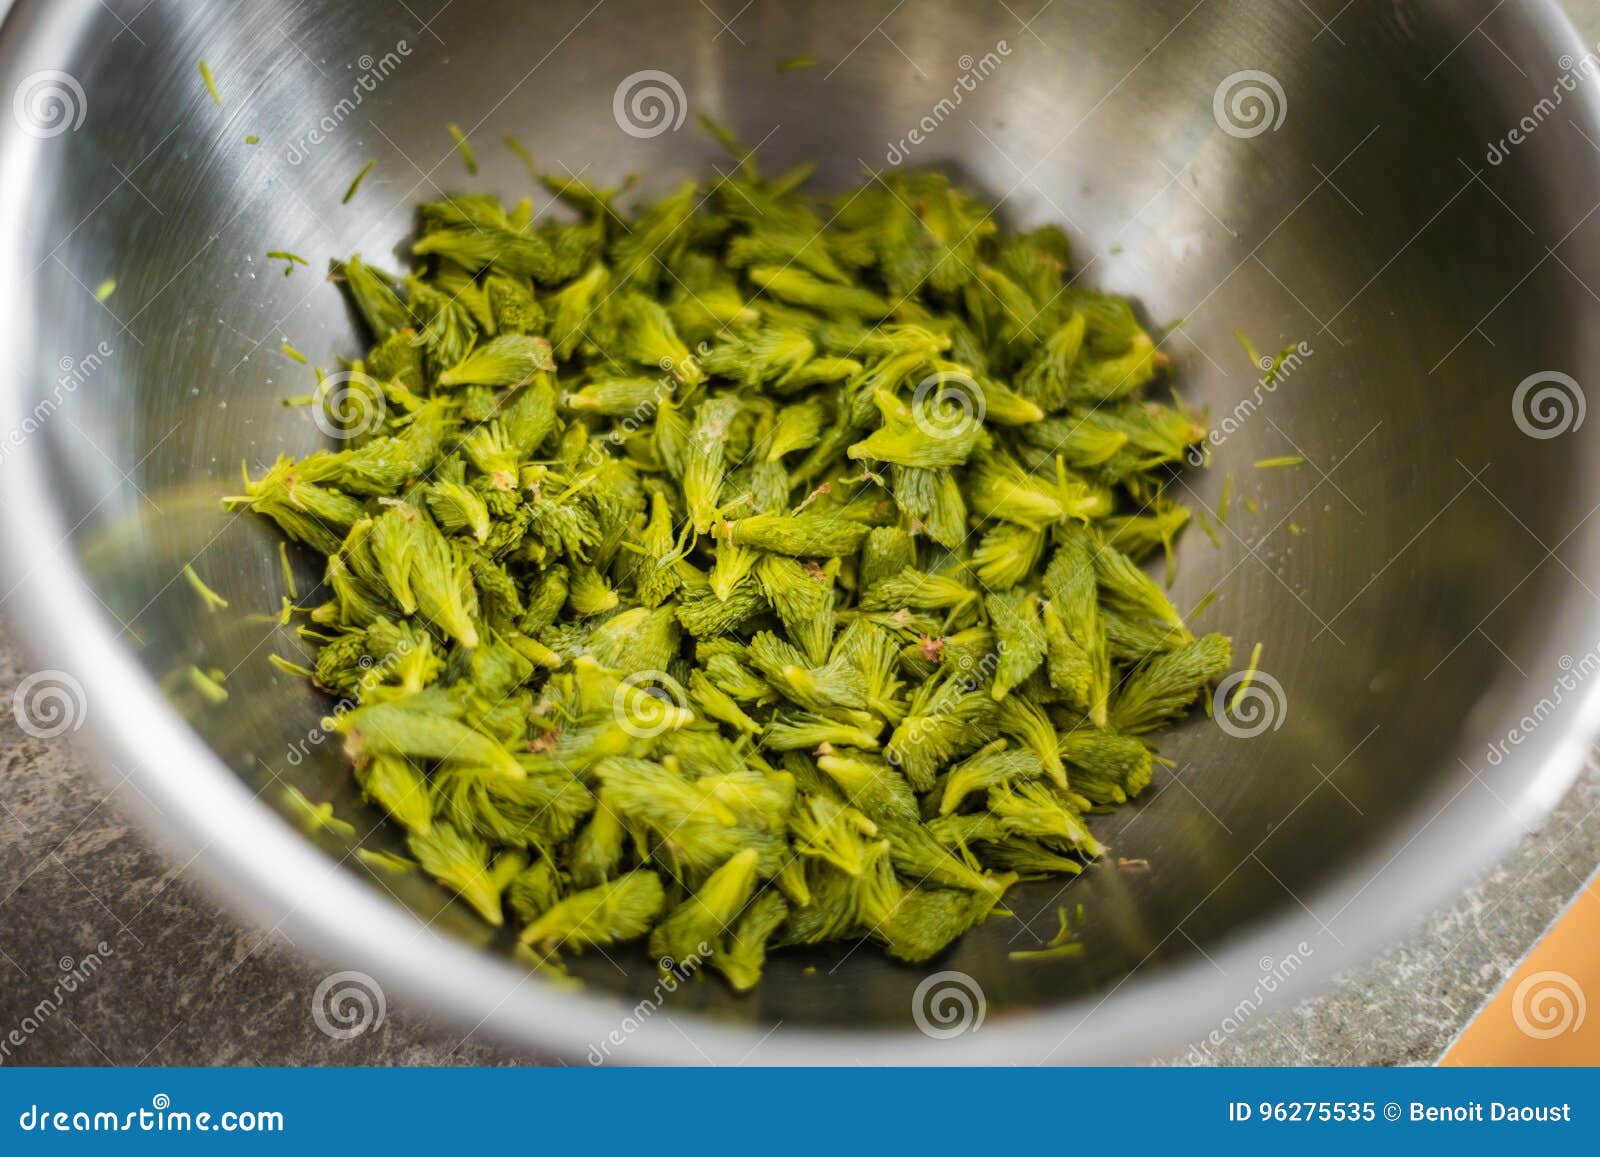 fir fresh tips into an inox bowl for a beer recipe